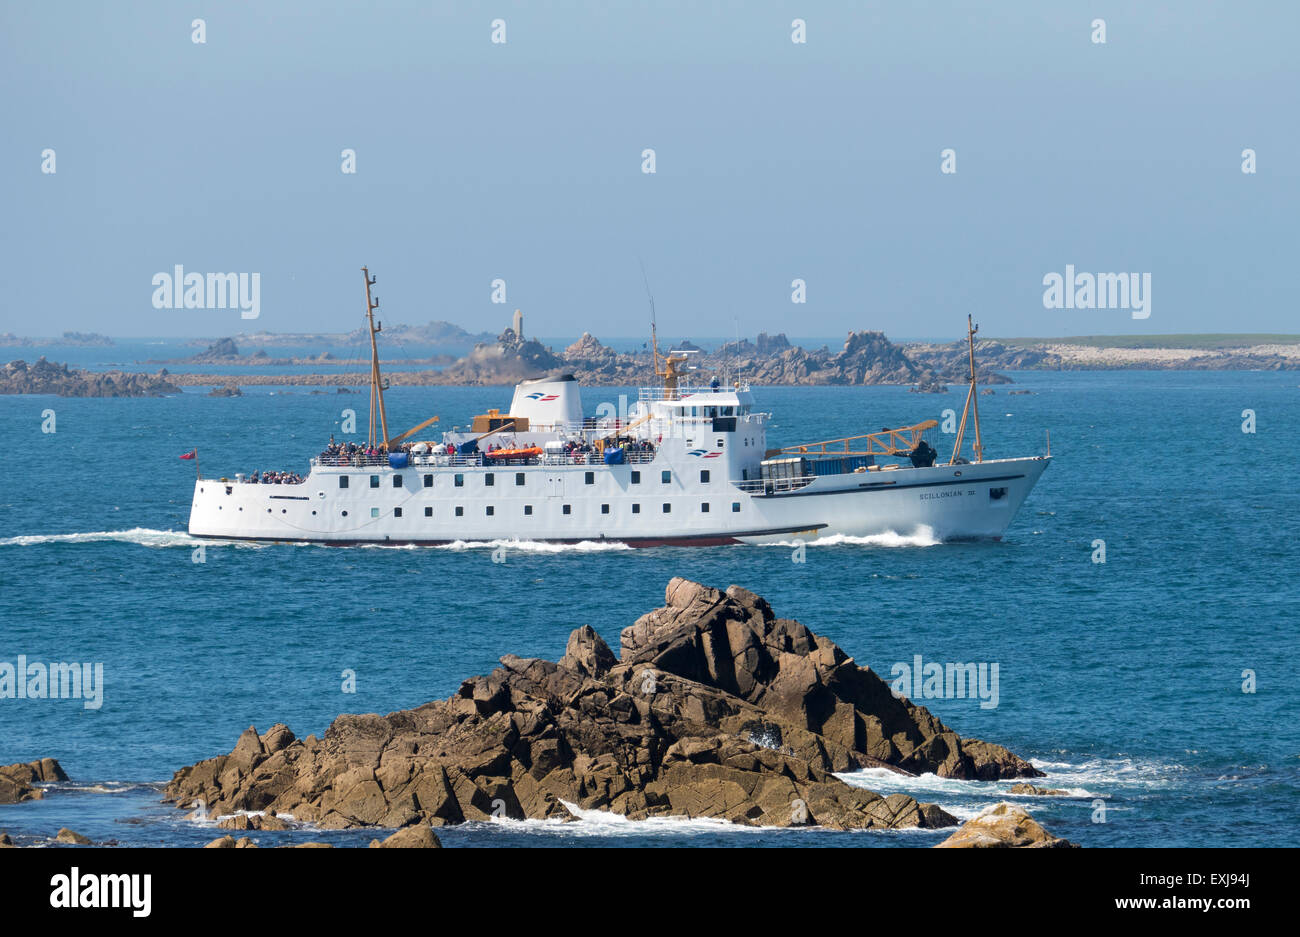 Scillonian III, Isles of Scilly ferry passenger ship passing between St. Mary's and St Agnes shortly before reaching St. Mary's. Stock Photo